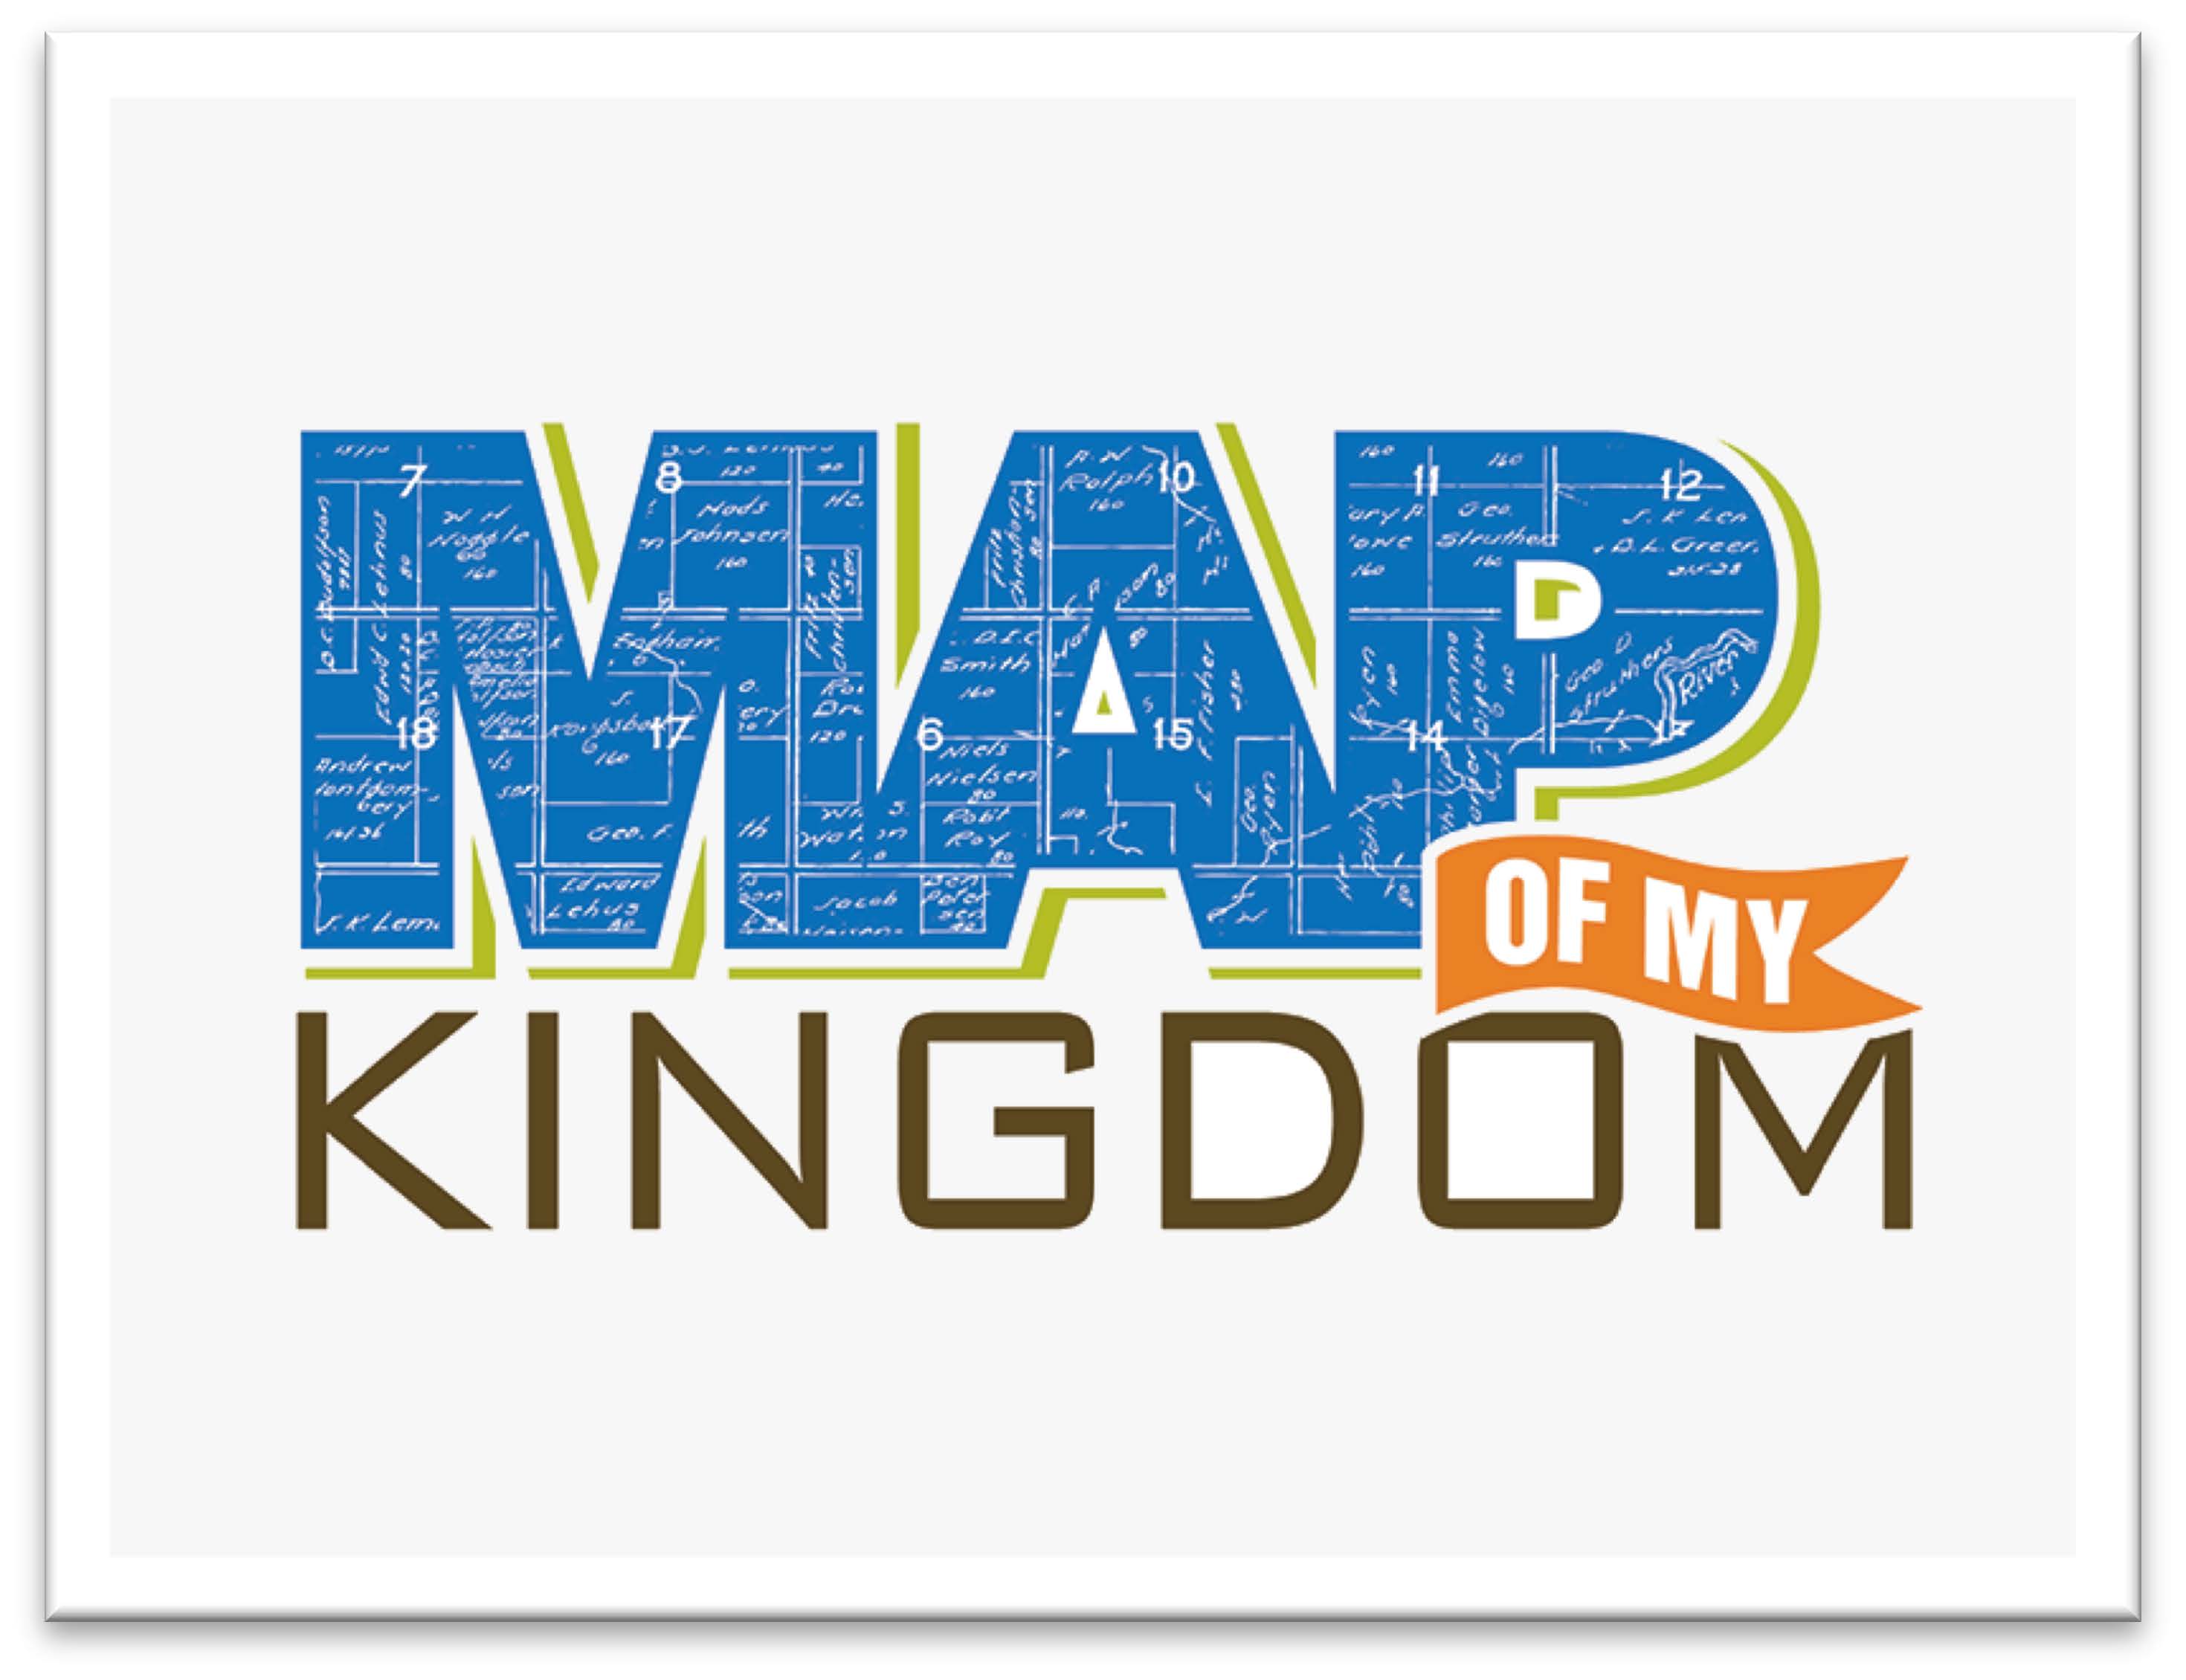 Open 'Map of My Kingdom' tackles the critical issue of land transition. 